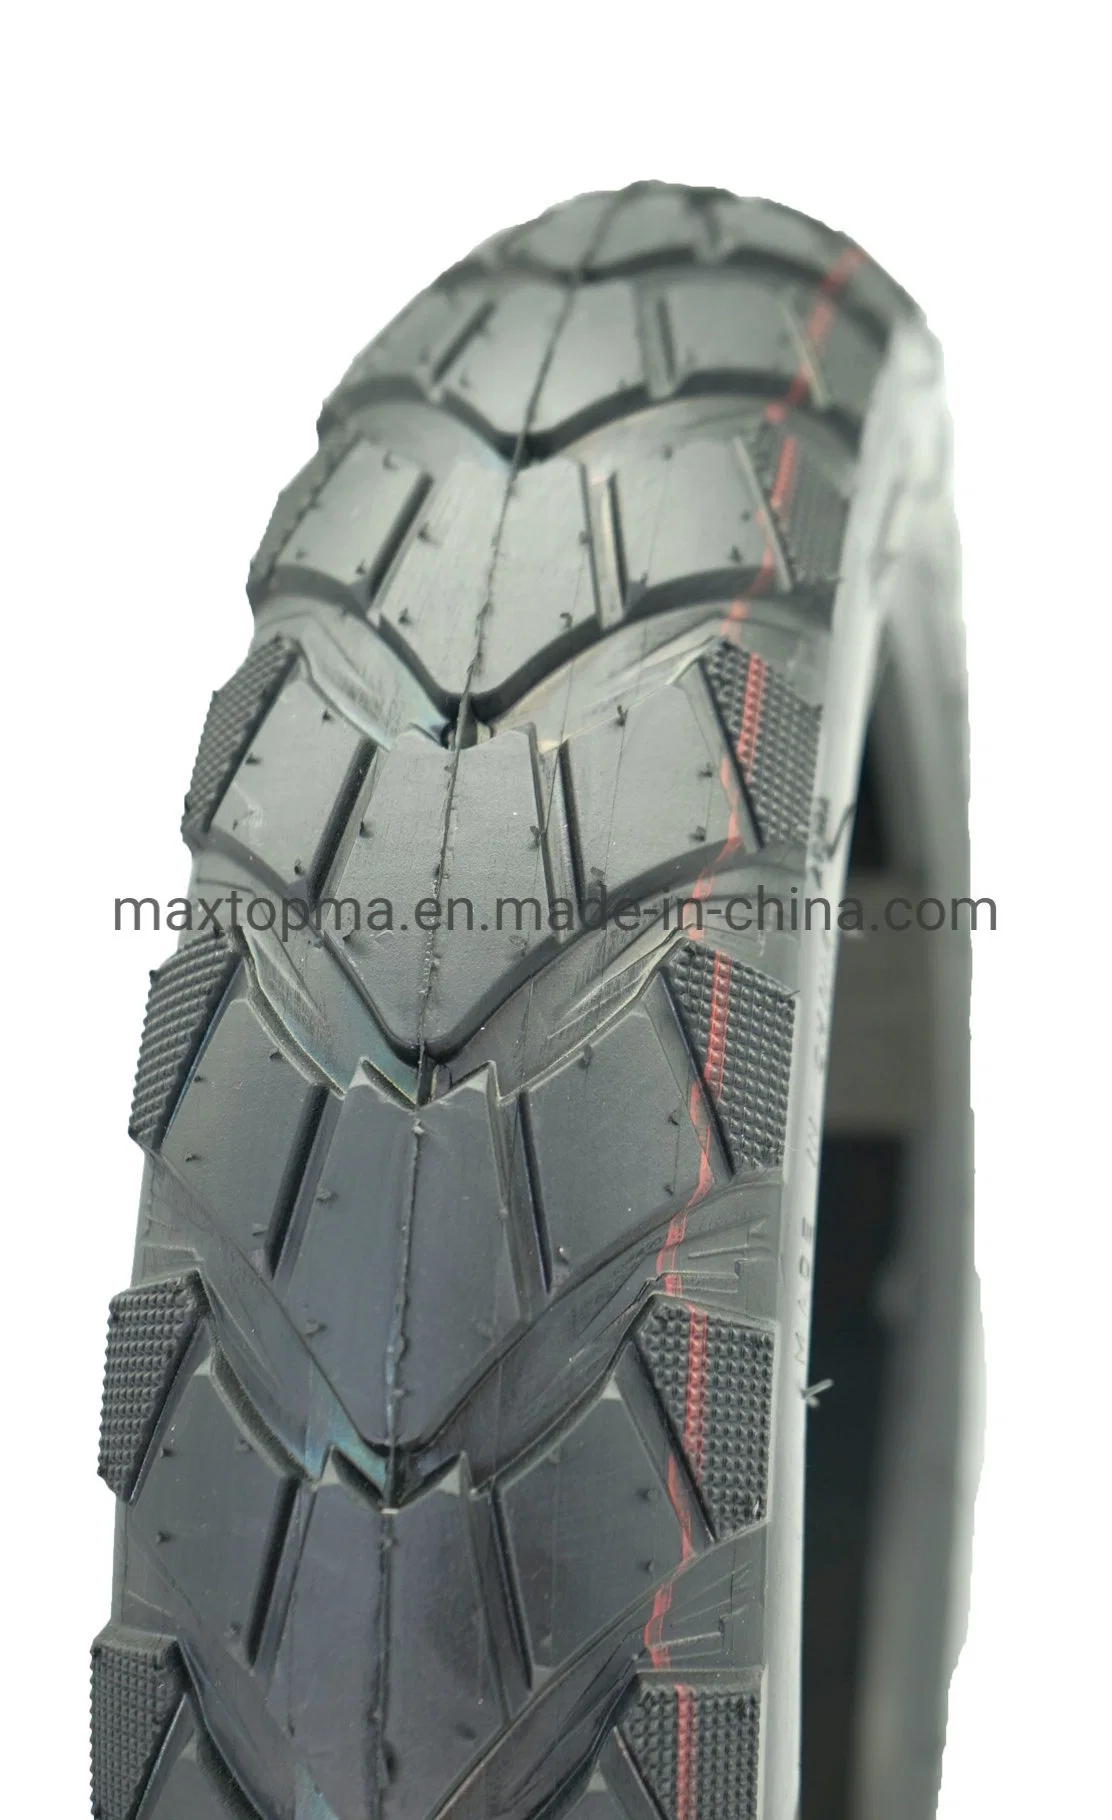 Golf Cart Scooter Motorcycle Trailer ATV Snowthrower Go Kart Tyre Motorcycle Part Tubeless Rubber Tire 90/70-12 90/80-12 90/90-12 80/100-12 120/70-12 130/70-12